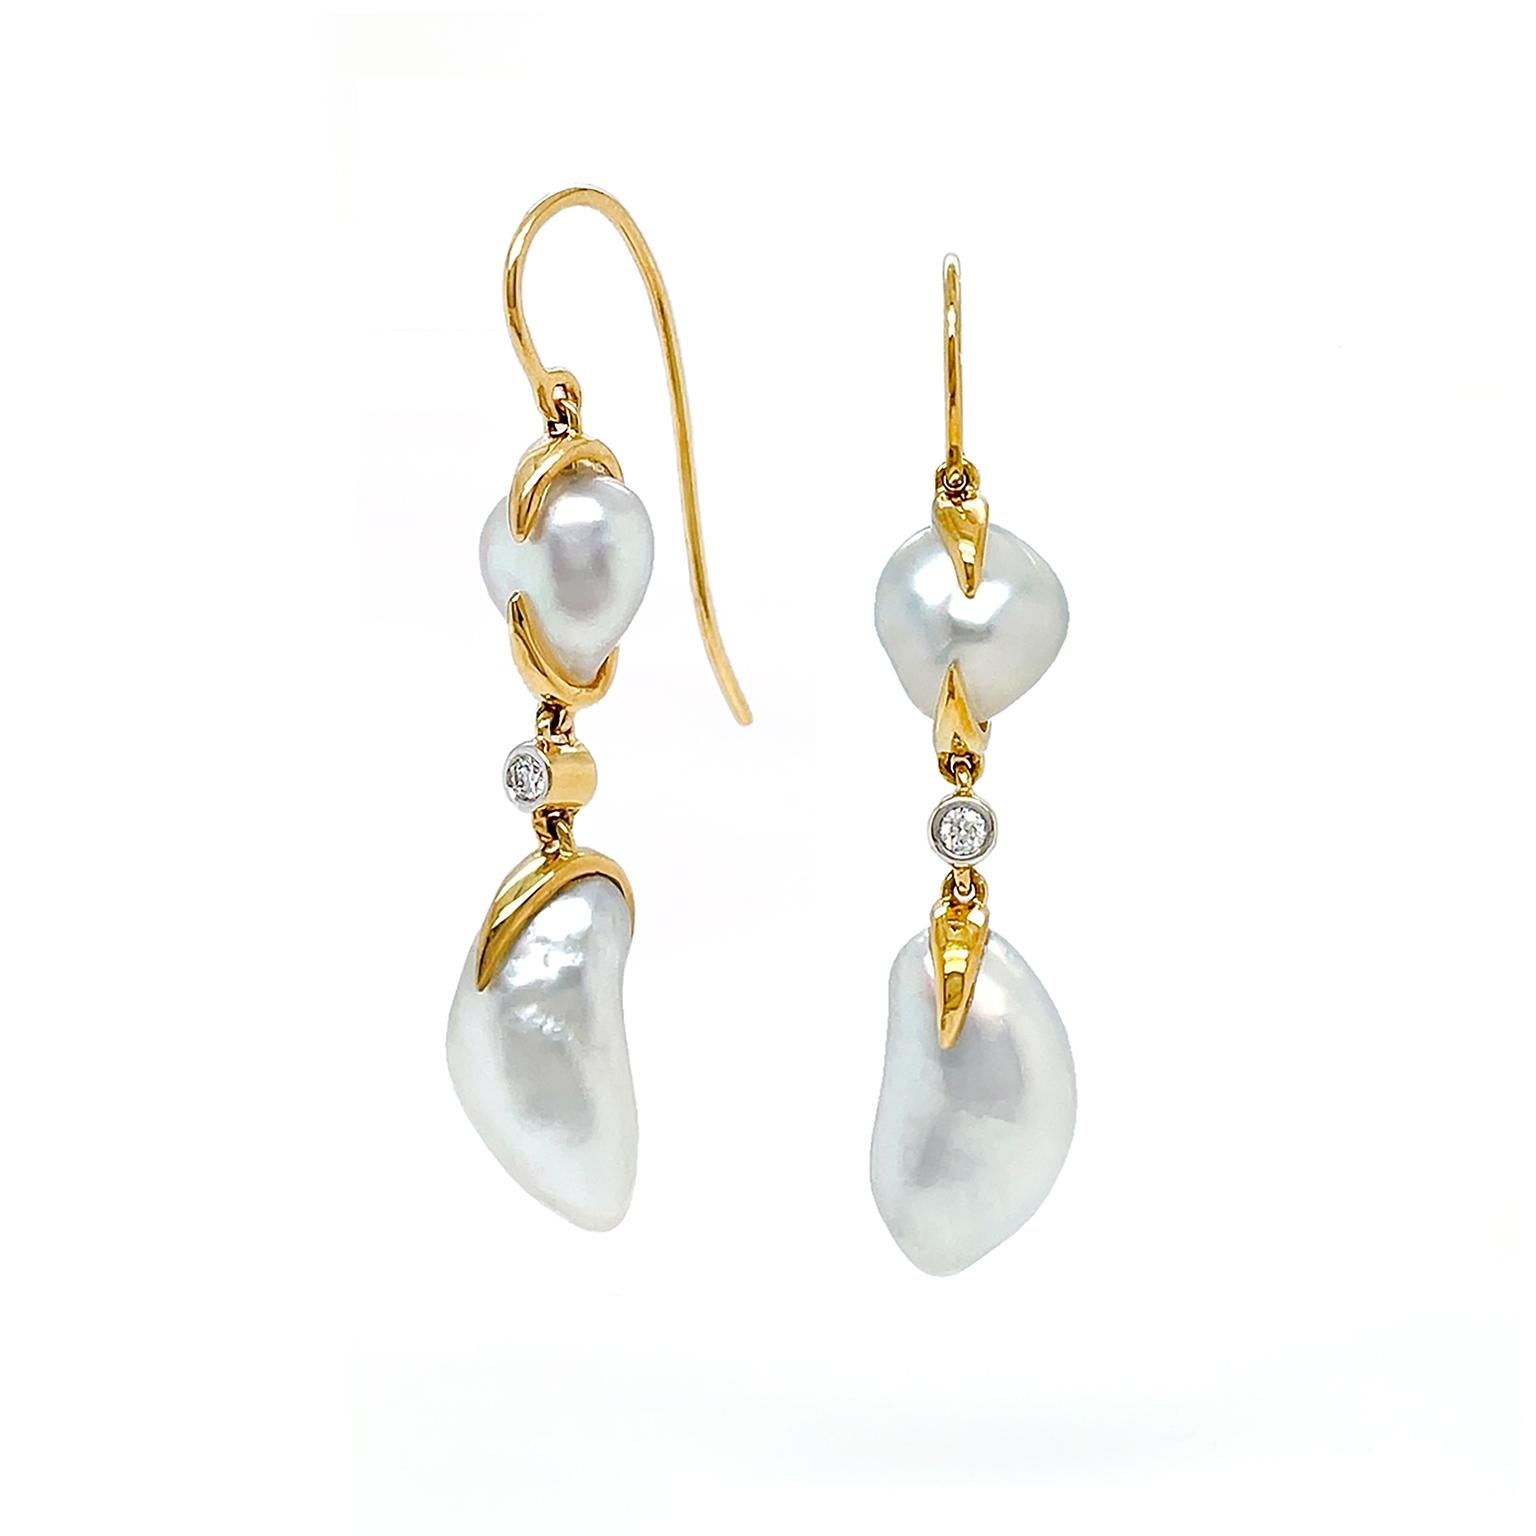 The satin bodies of white keshi pearls are the focal point of these earrings. 18k yellow gold French hooks lead to a cushion shaped white keshi pearl secured by gold. In the center a single brilliant cut diamond gives a luminous flare. Next descends